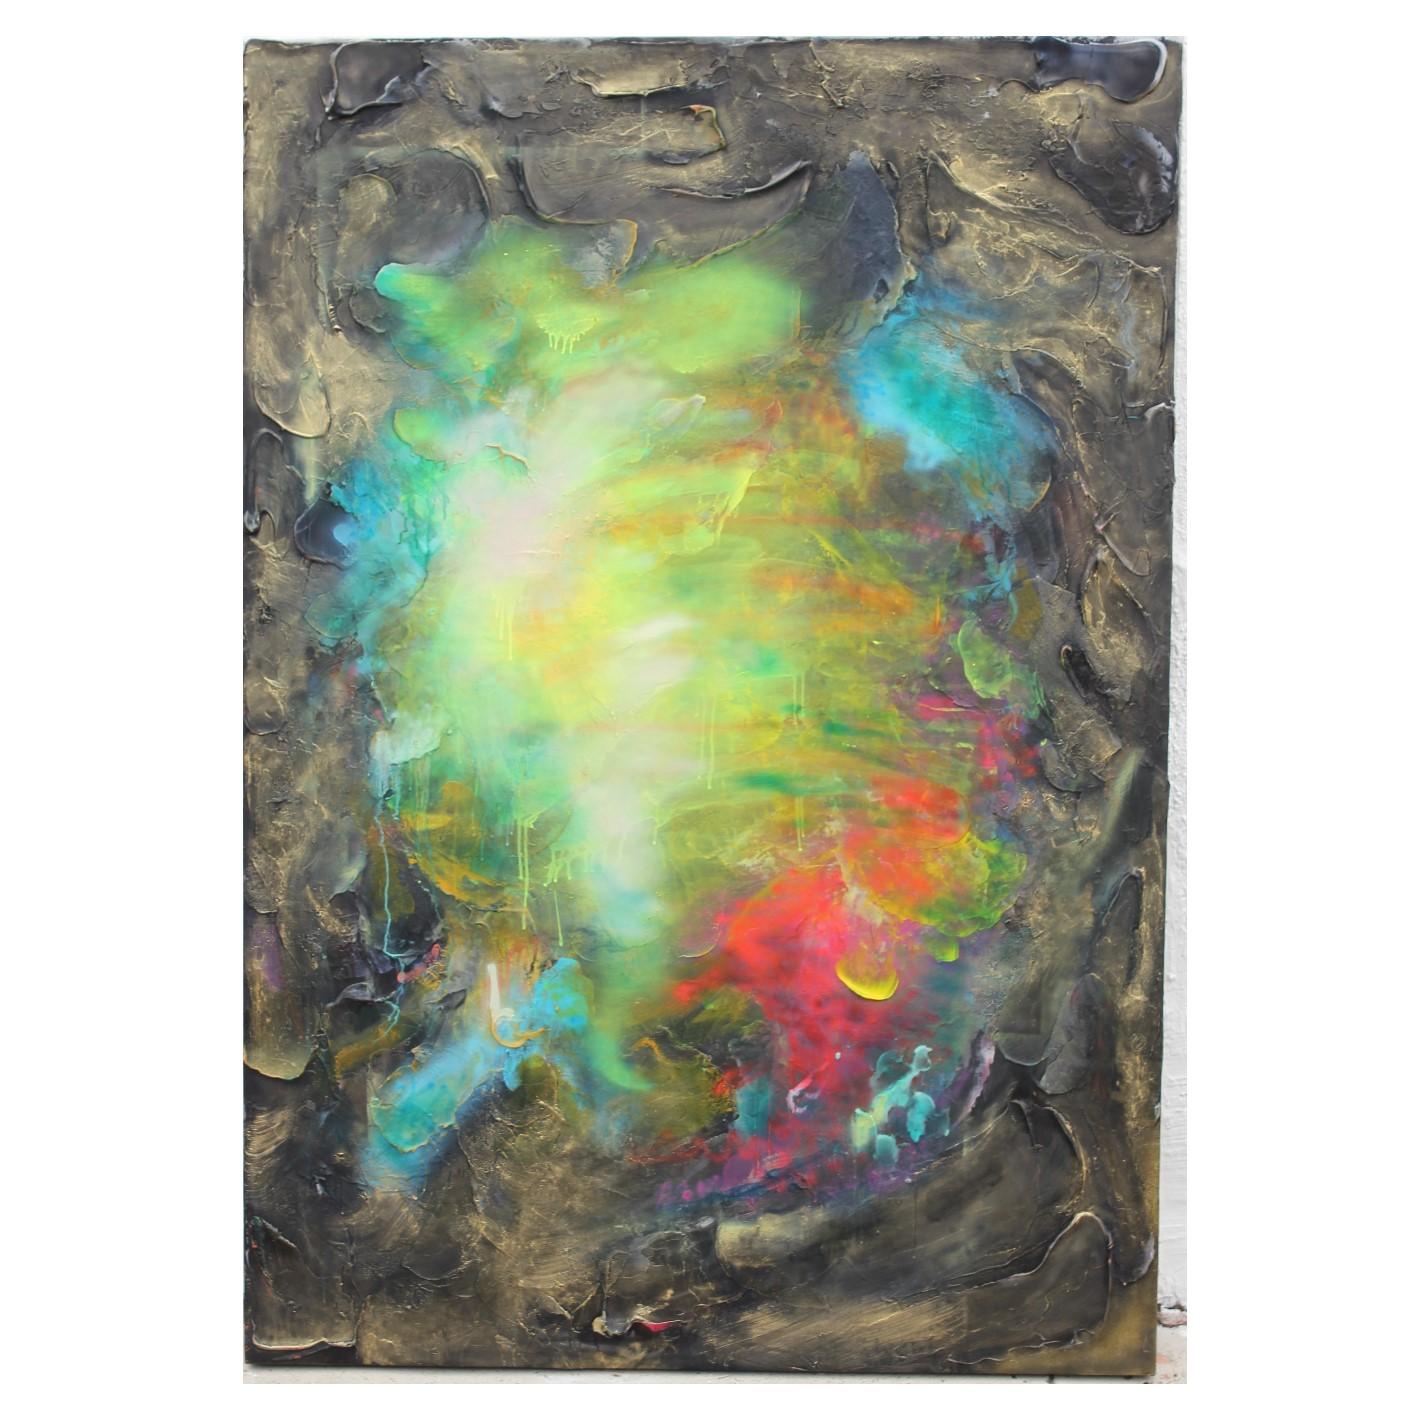 Geoff Hippenstiel Abstract Painting - "No Title" Black Impasto Painting with Neon Colors